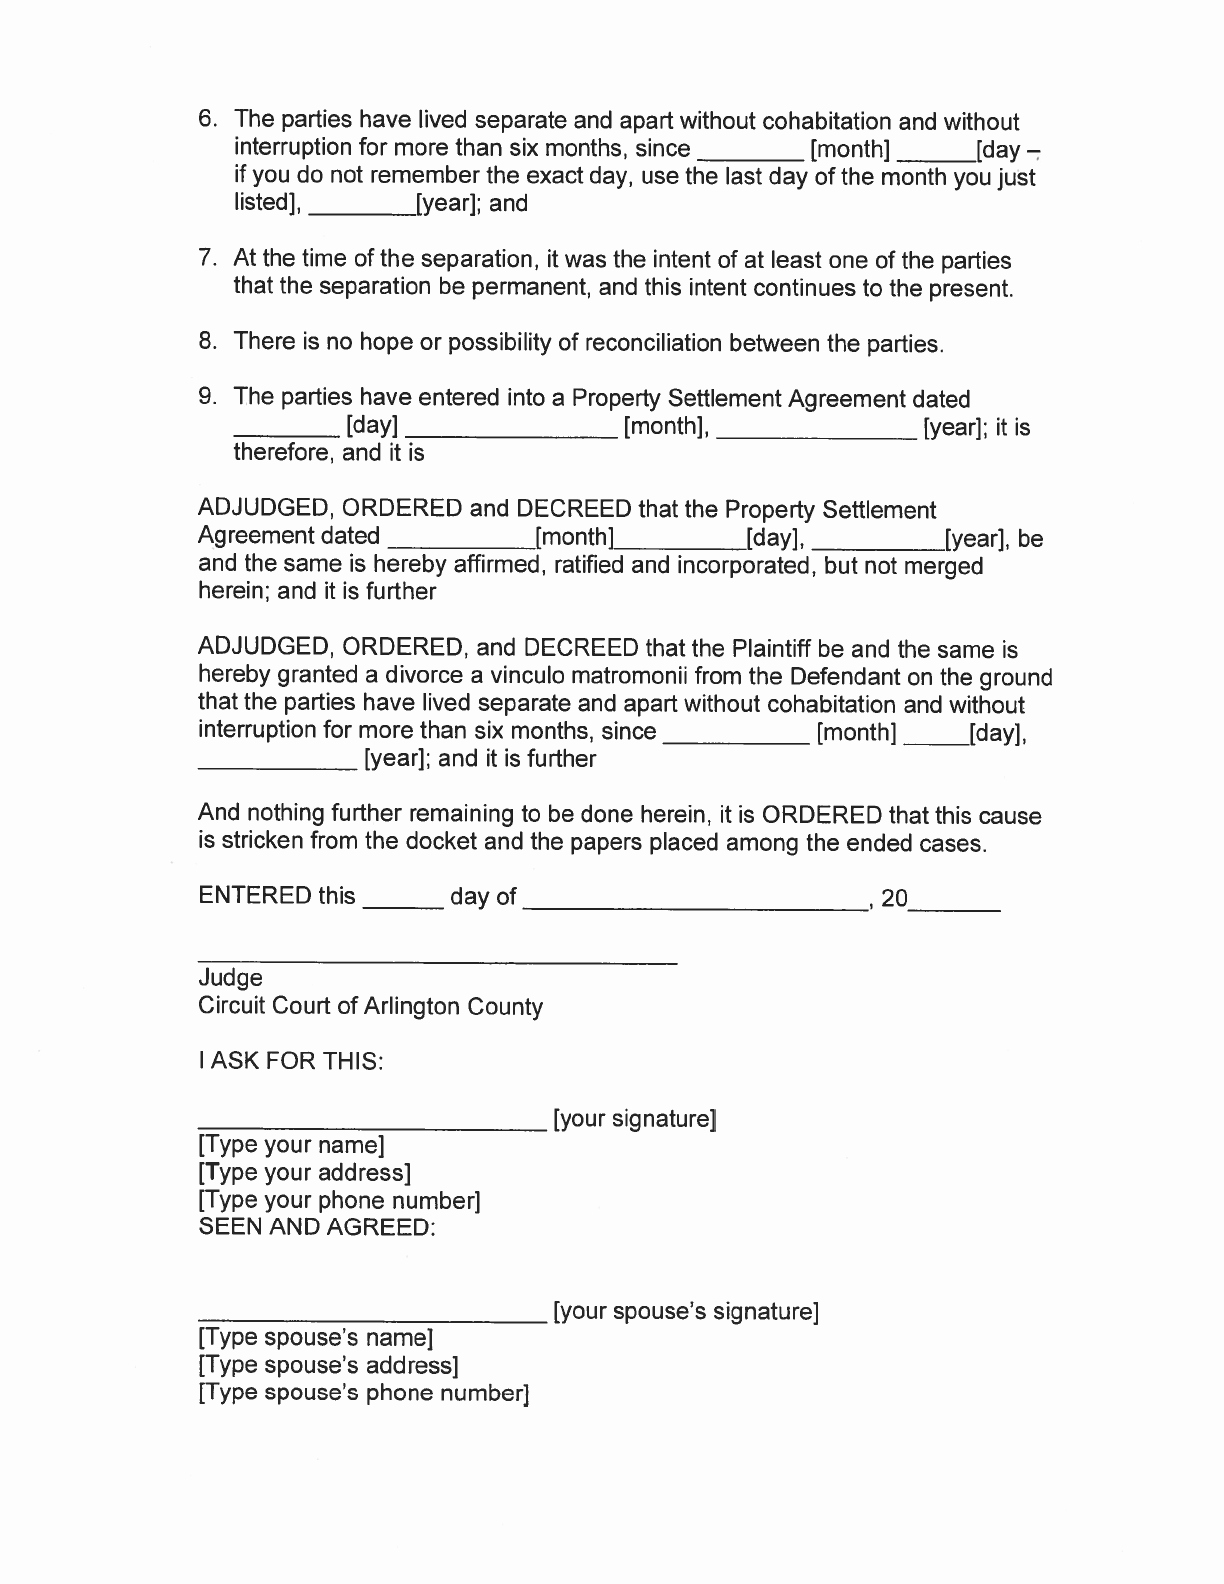 Virginia Separation Agreement Template Beautiful Download Virginia Separation Agreement Template for Free